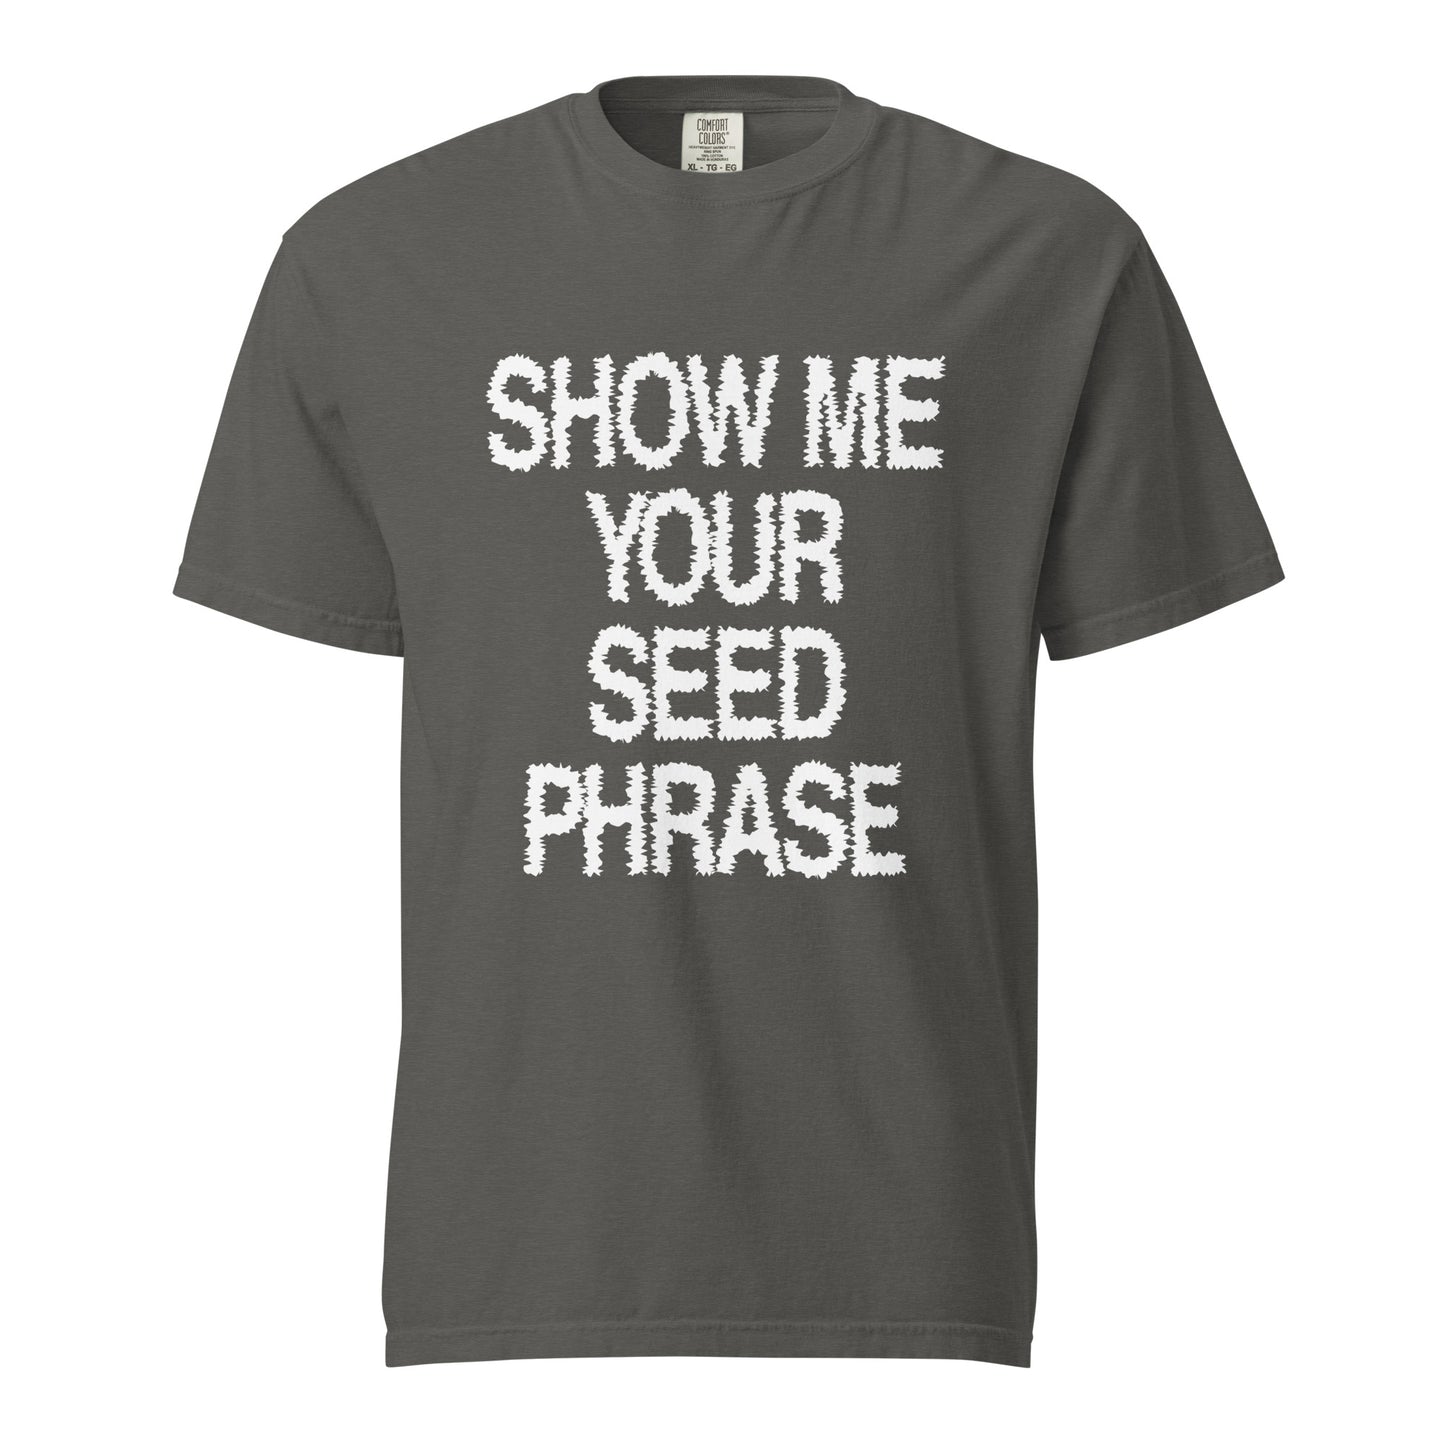 Show me your seed phrase